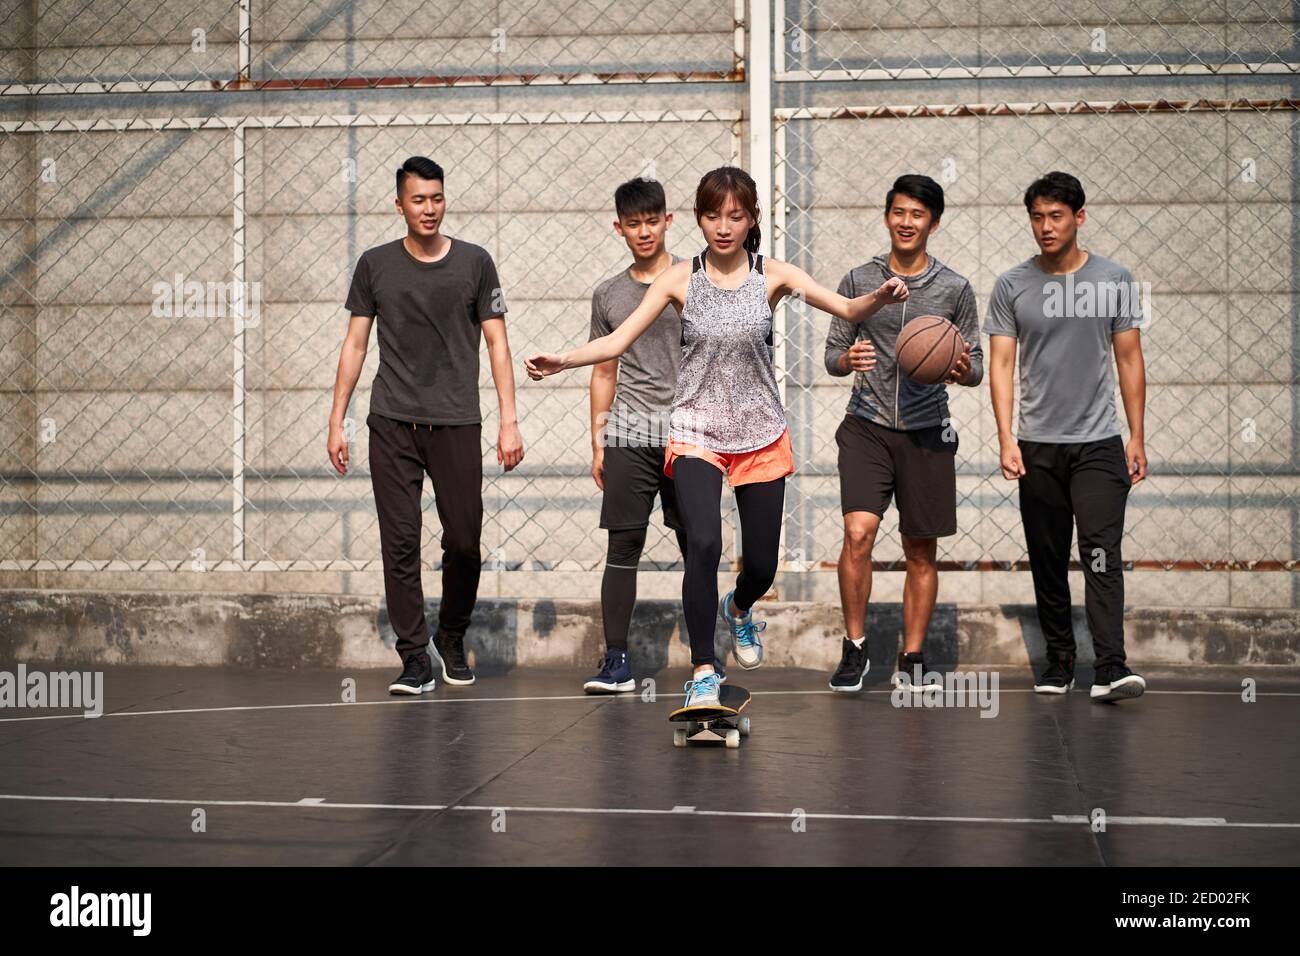 young asian woman skateboarder skateboarding outdoors with friends watching from behind Stock Photo